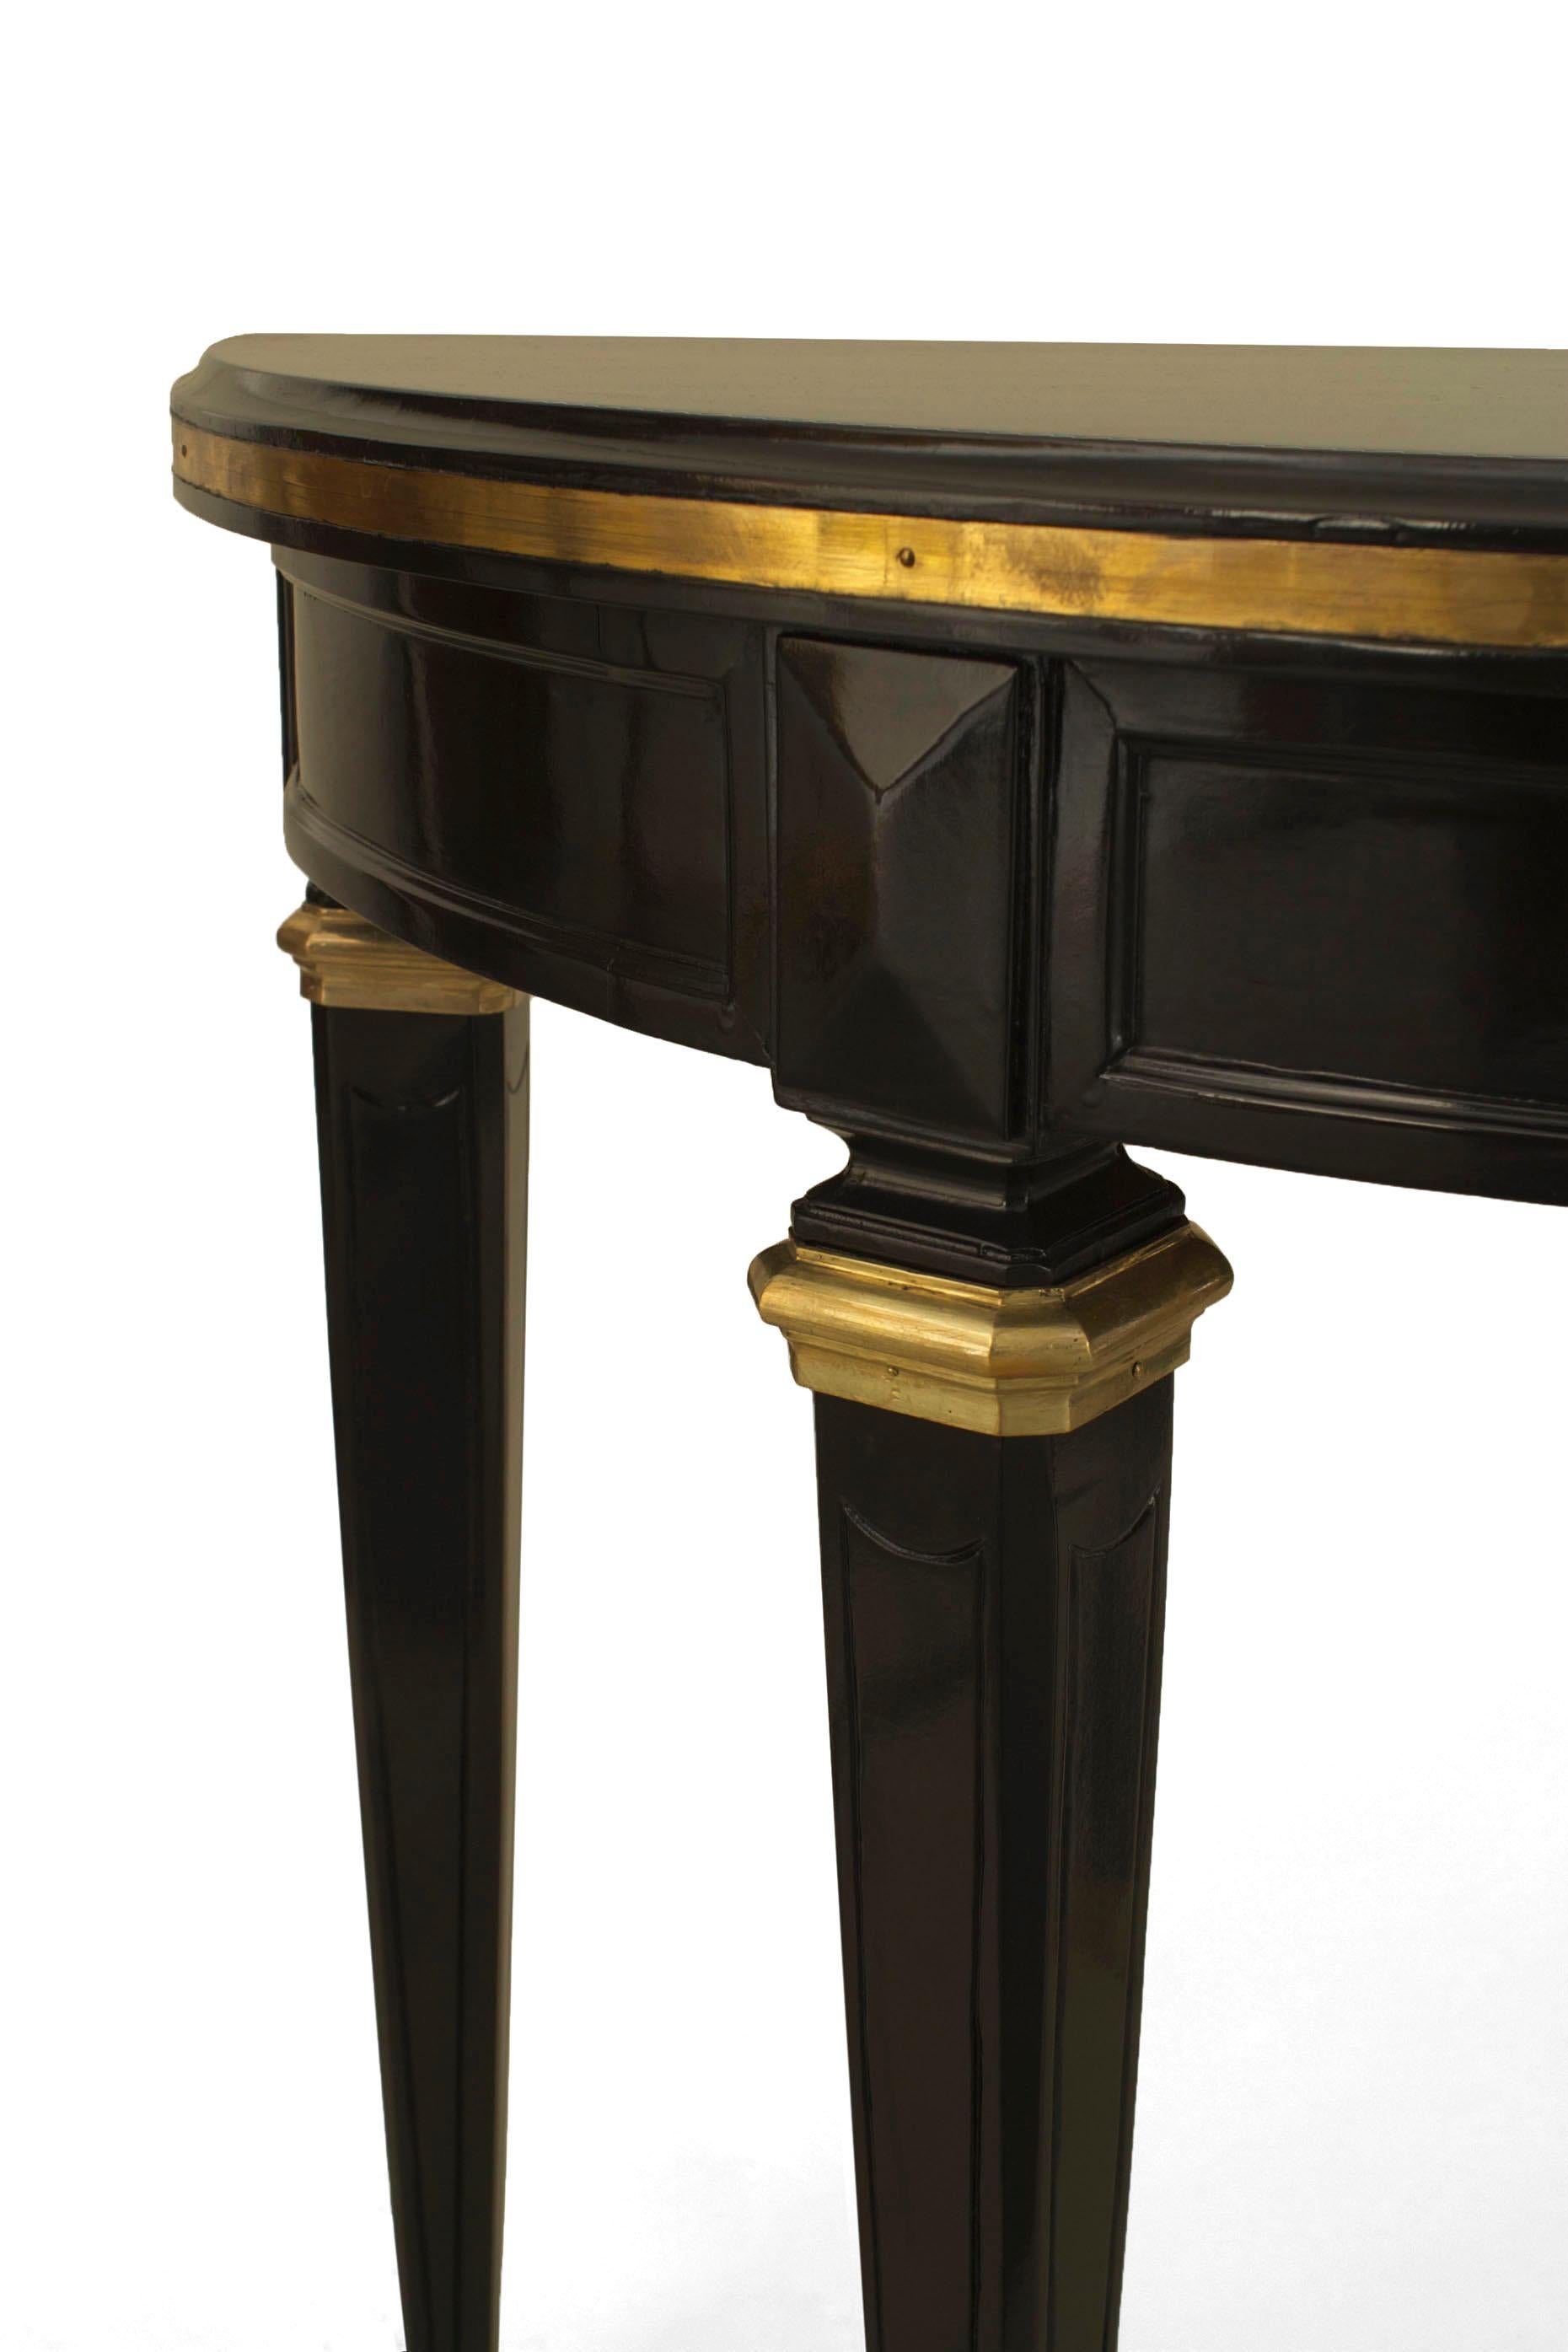 20th Century Pair of Jansen French Louis XVI Style Ebonized Demilune Console Tables For Sale